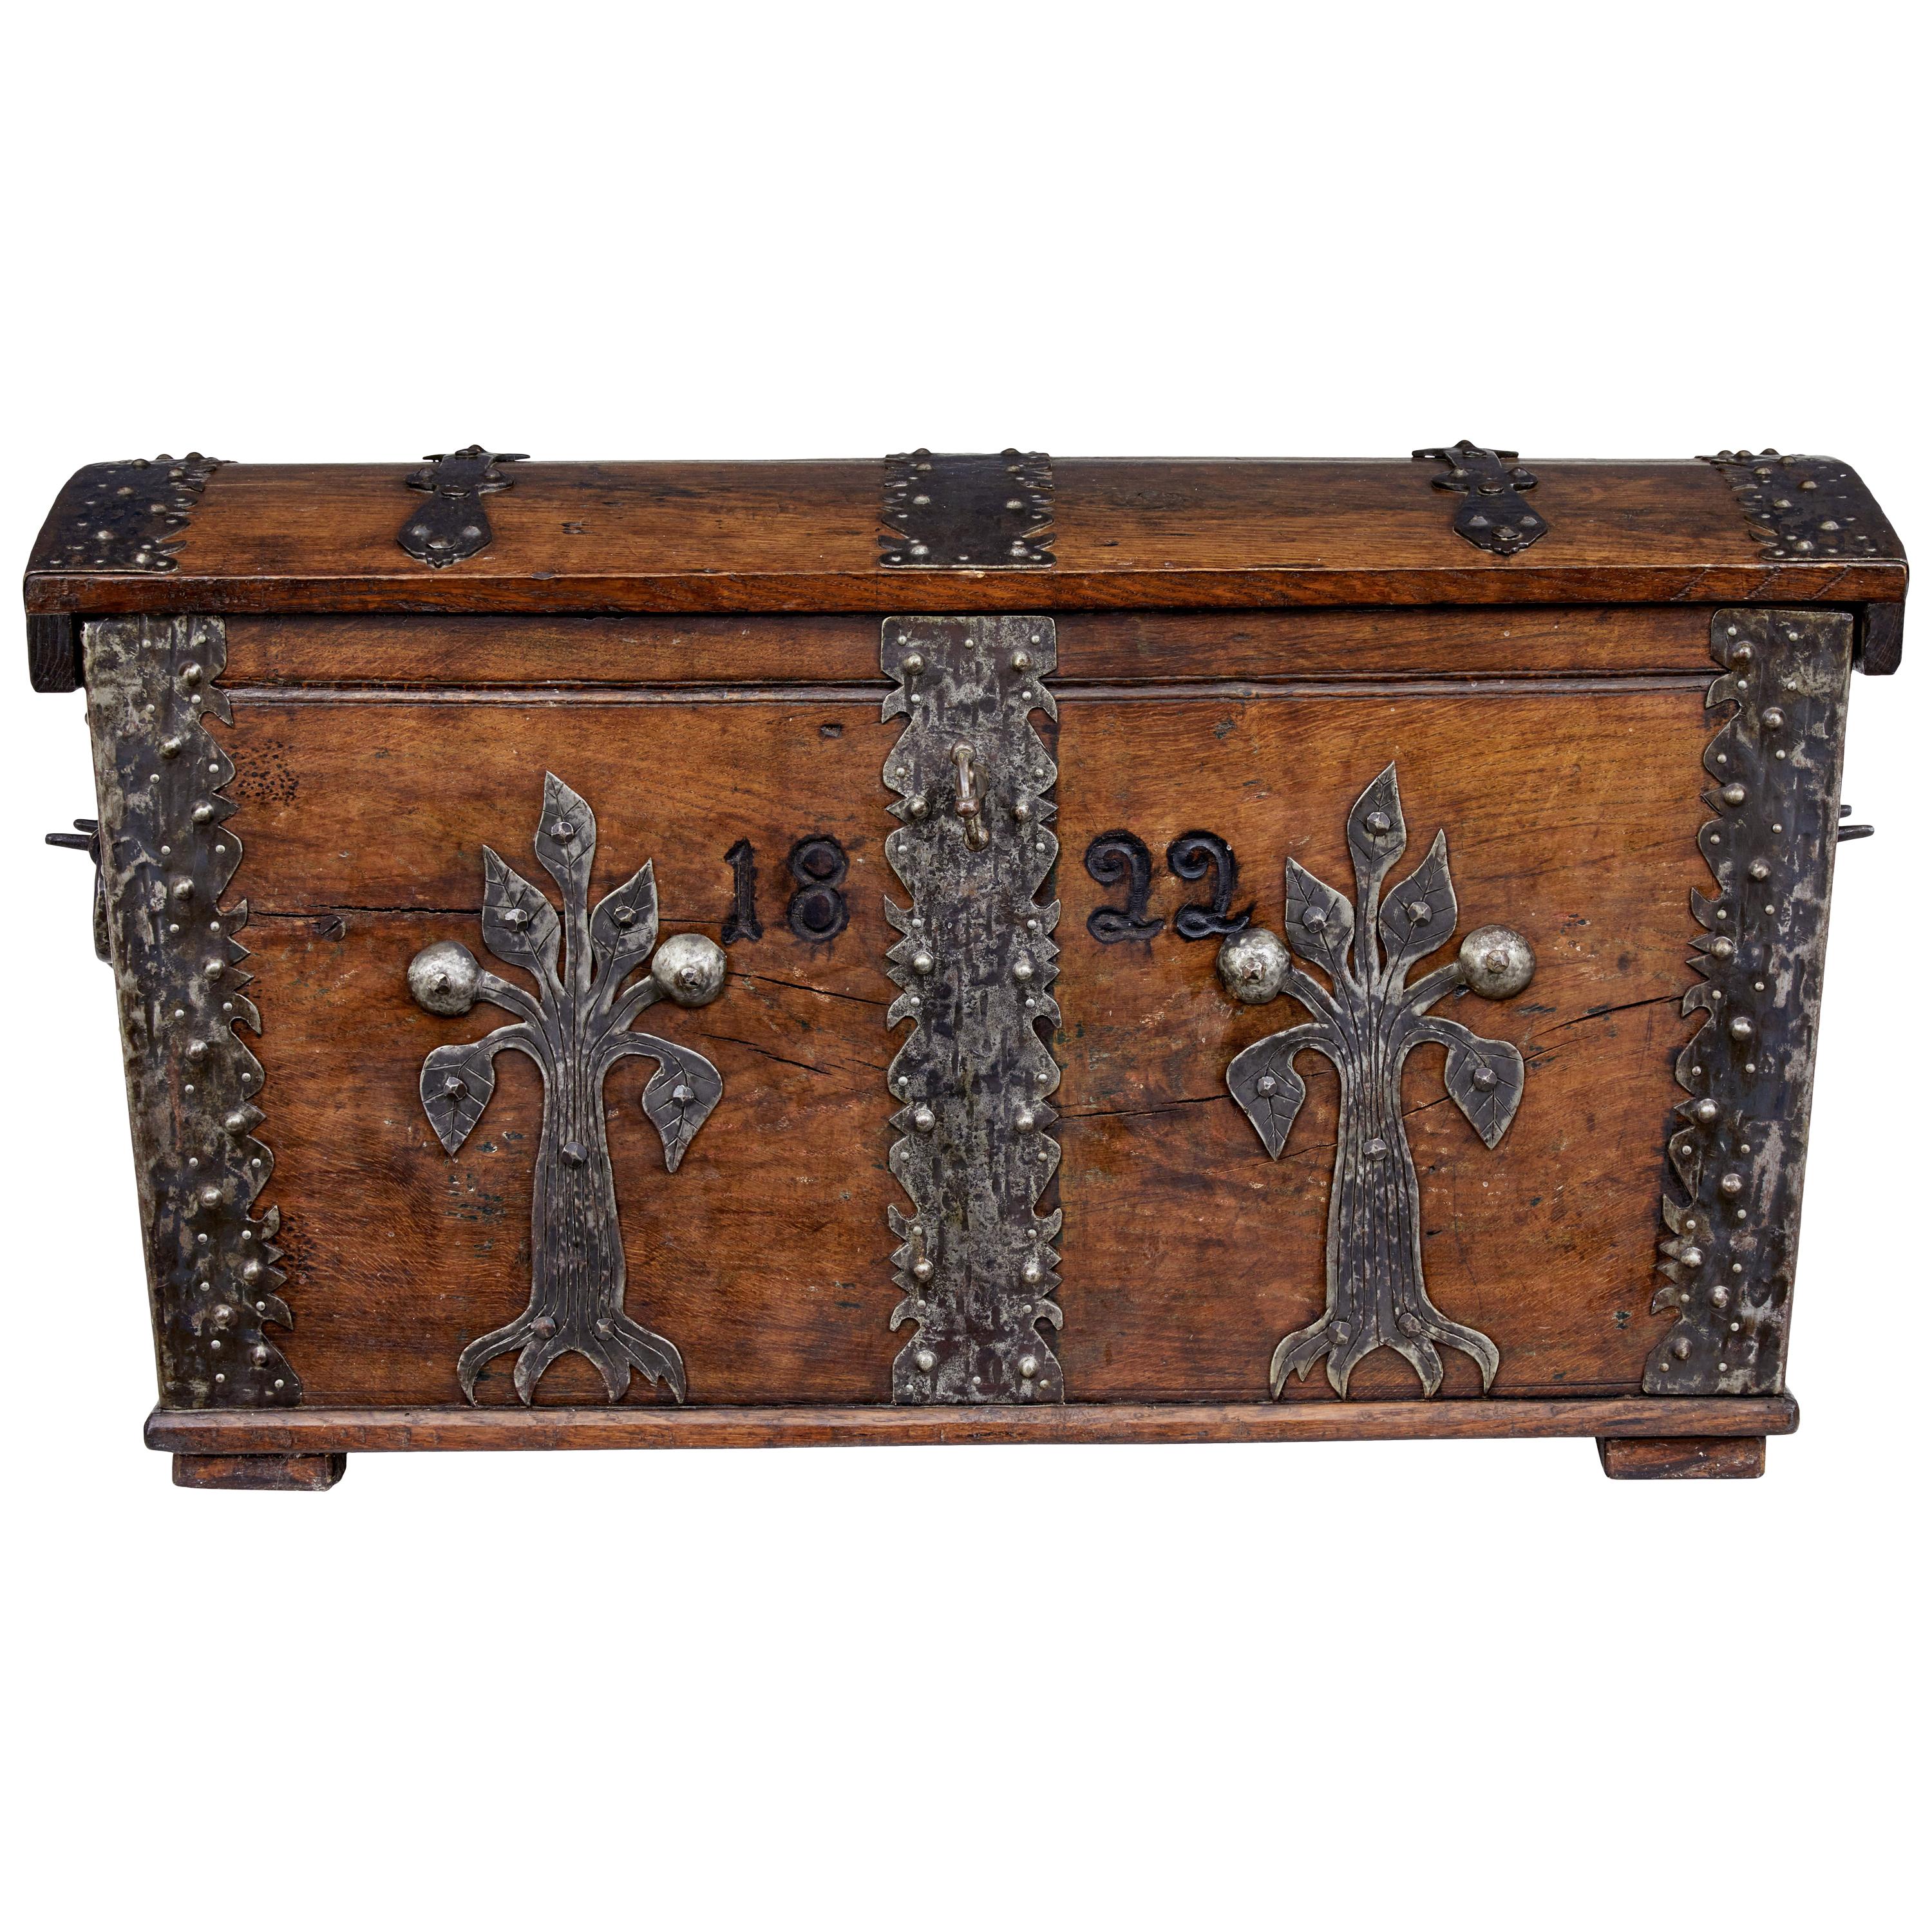 Early 19th Century Oak Domed Metal Bound Trunk